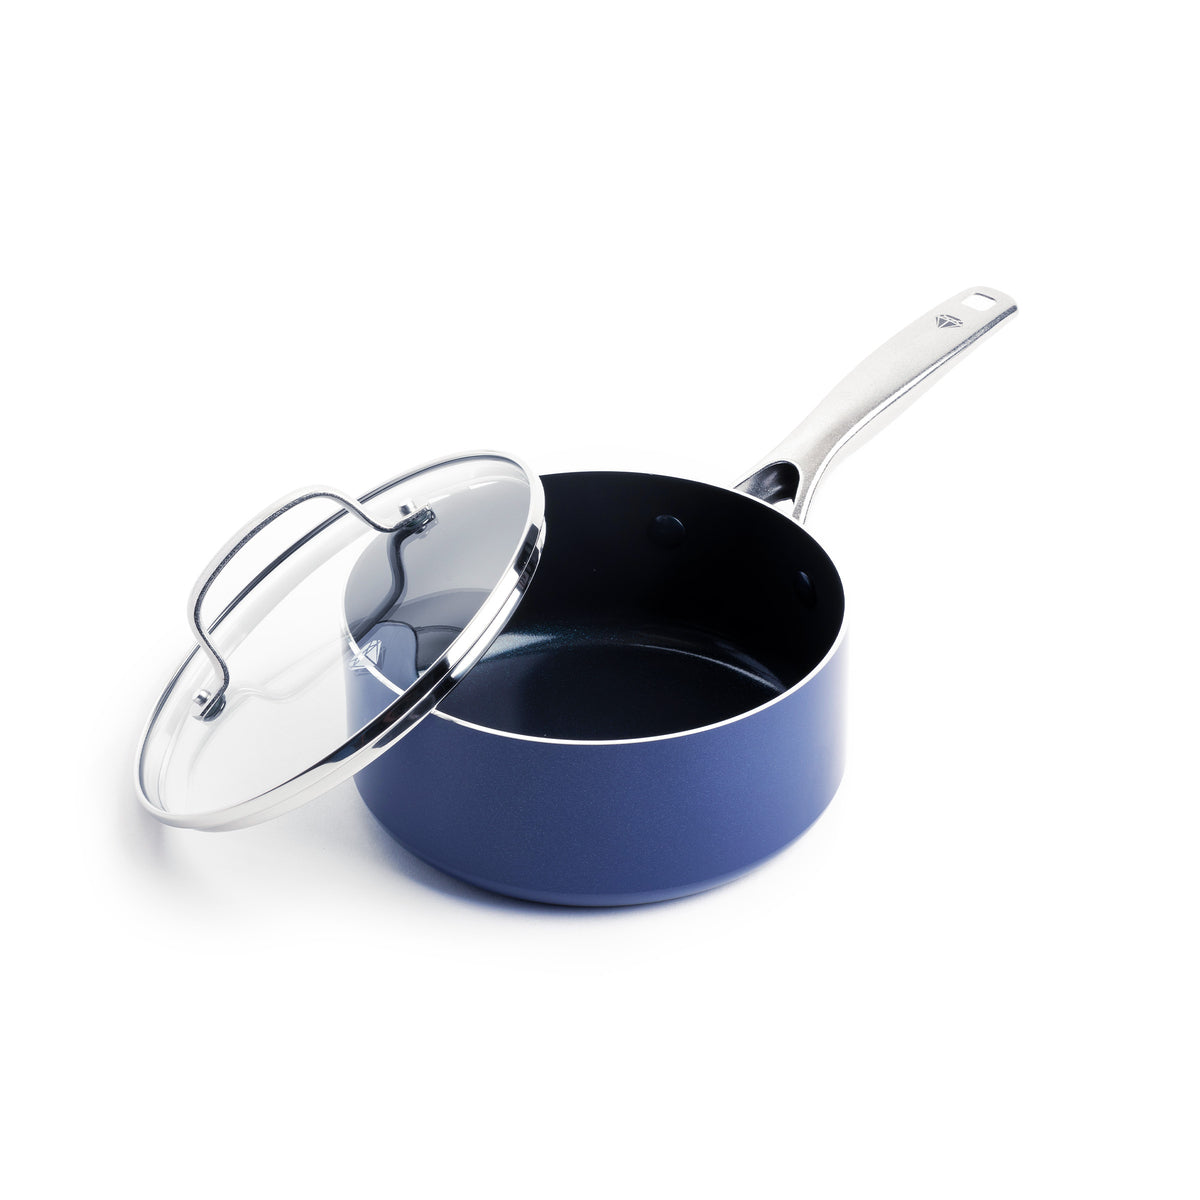 Sauce Pan with Lid Cheese Multipurpose Noodles Spaghetti Stainless